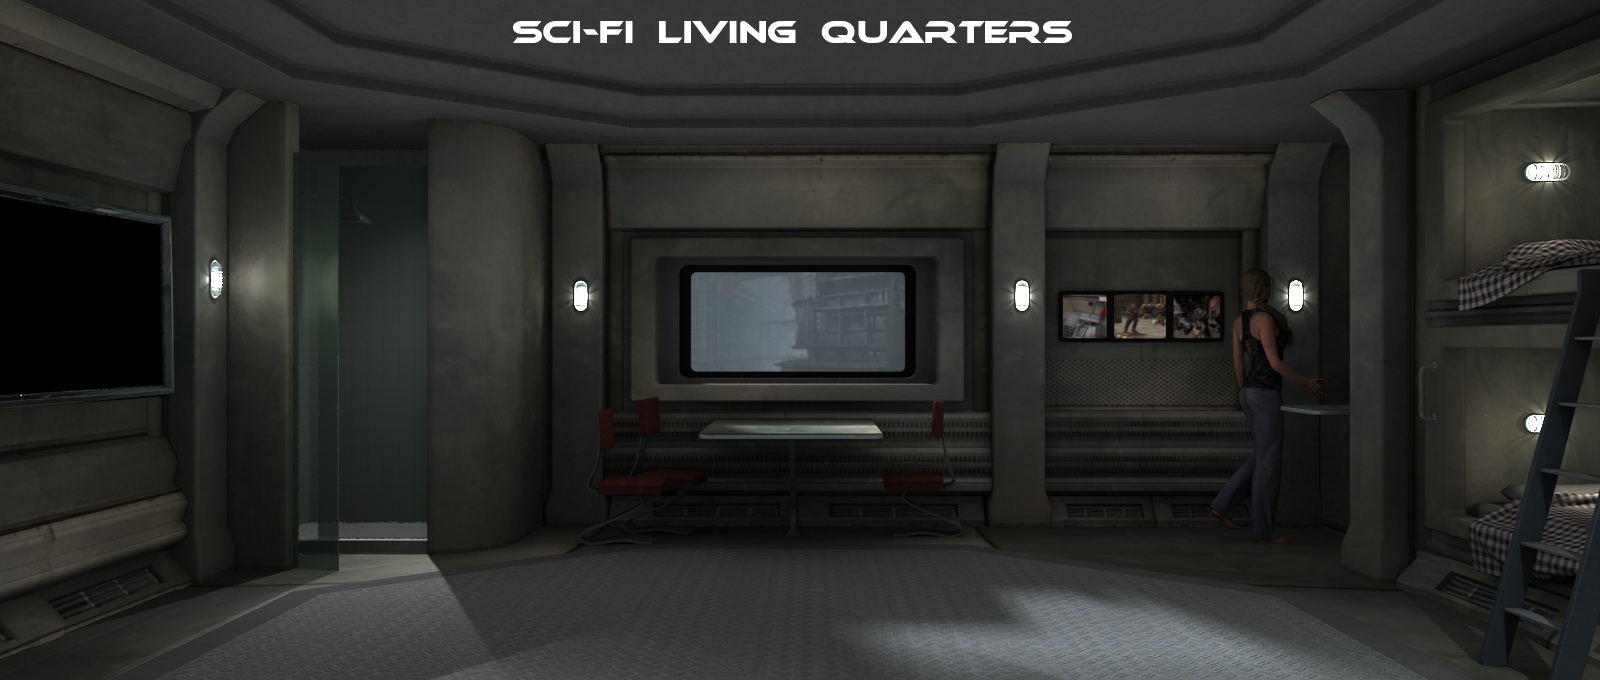 Sci-Fi Living Quarters by: FirstBastion, 3D Models by Daz 3D